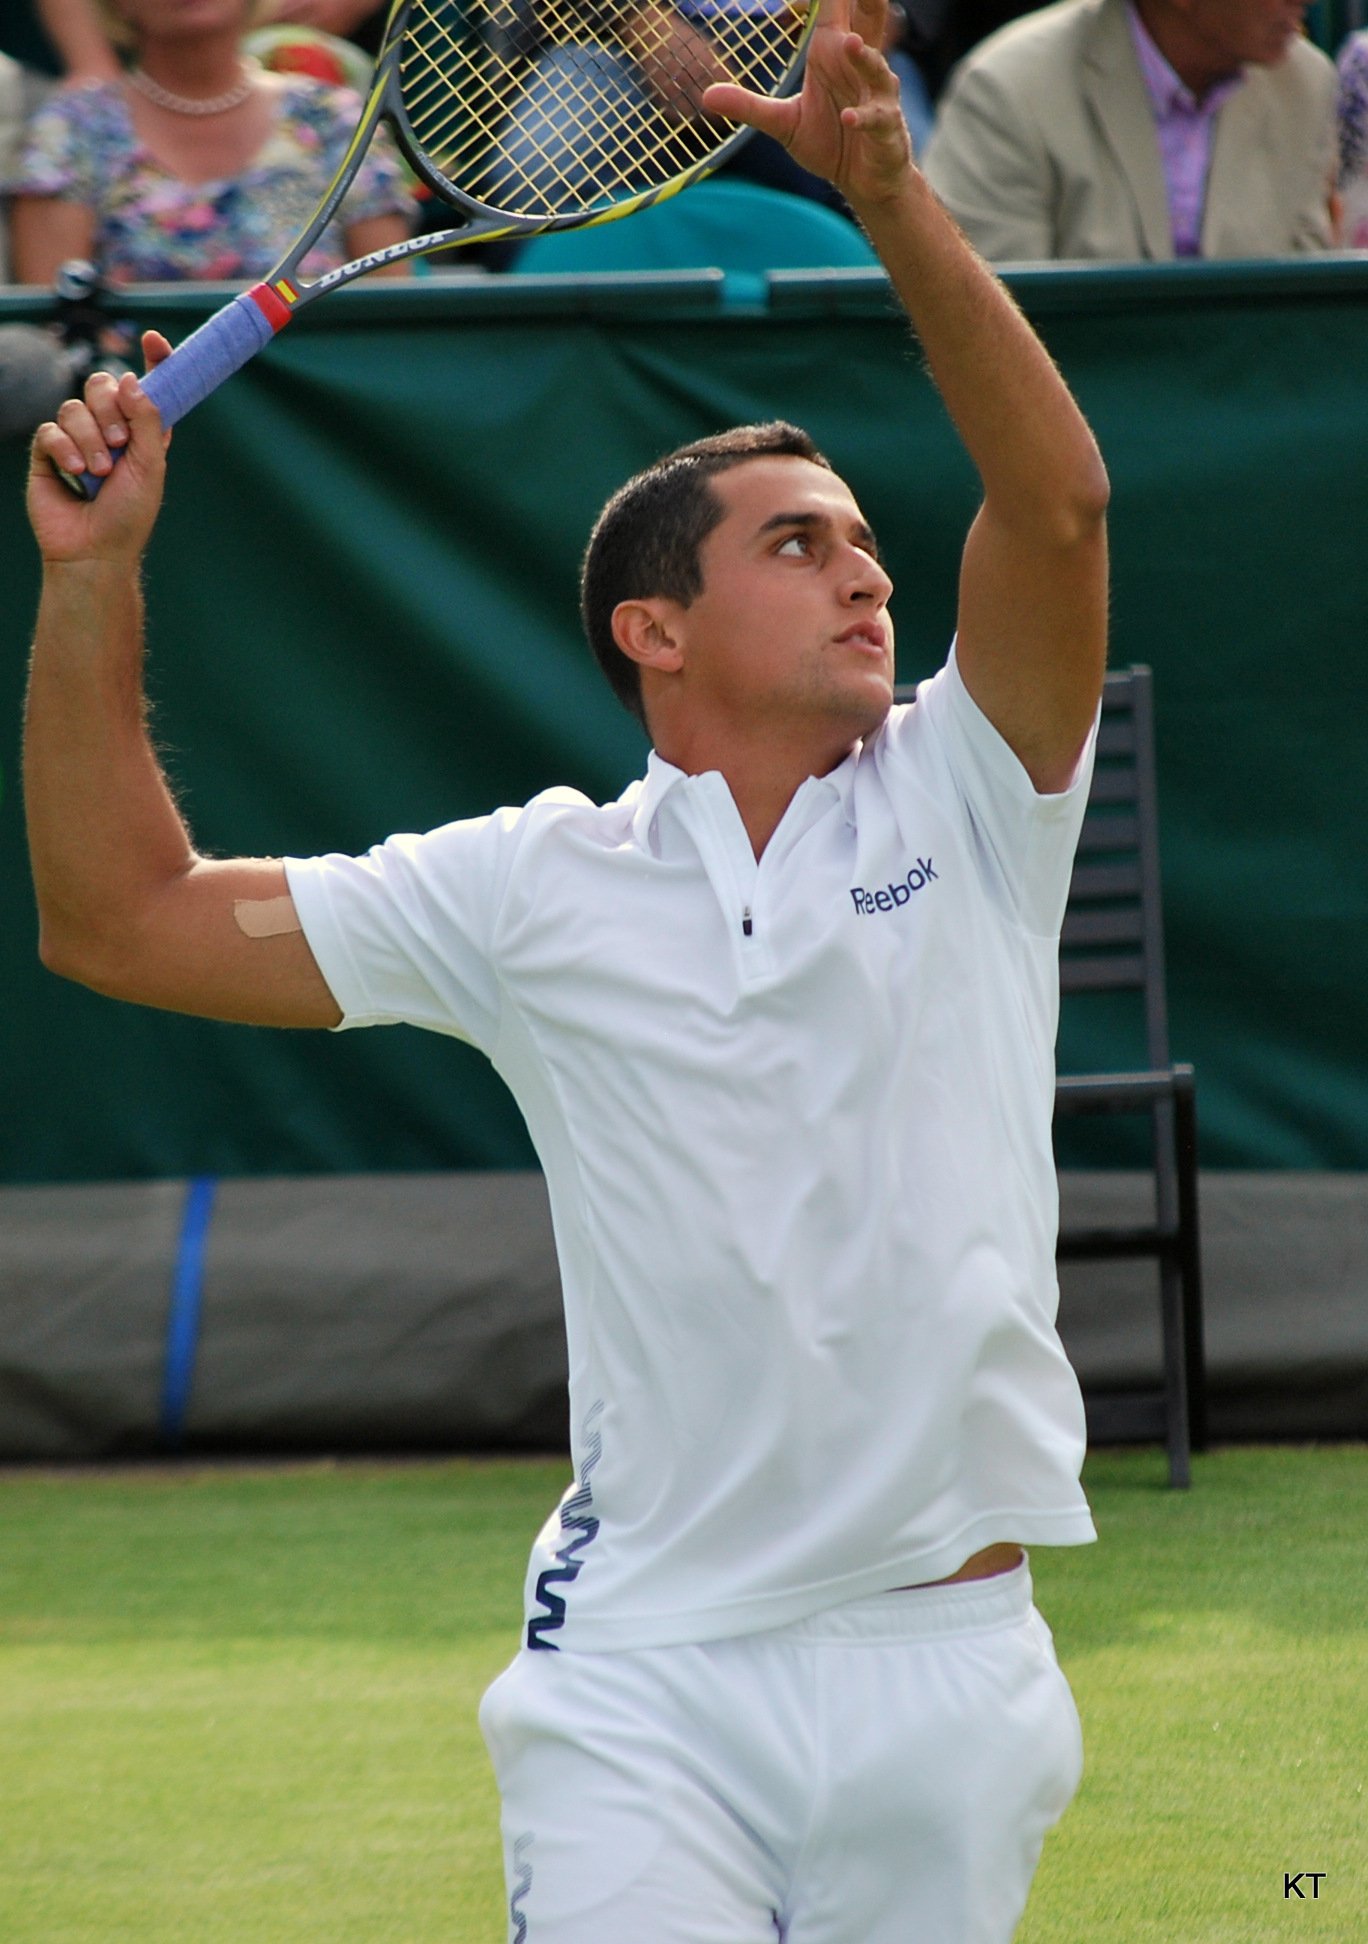 Happy Birthday Nicolas Almagro! The Spanish standout was born on this date: August 21, 1985 